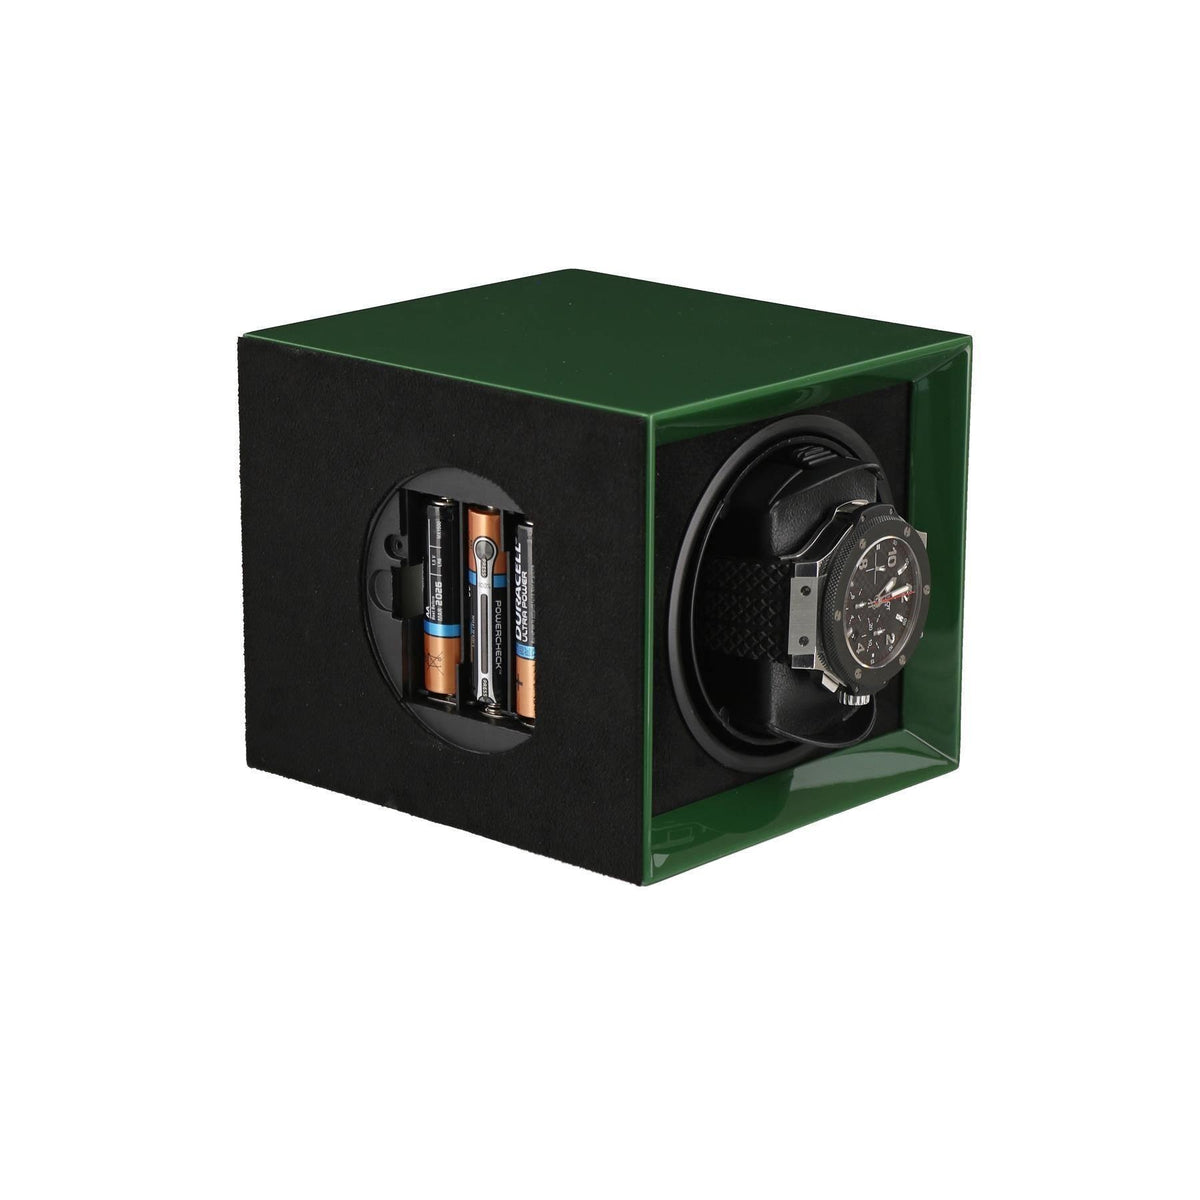 Watch Winder for 1 Automatic Watch in Green Mains or Battery by Aevitas